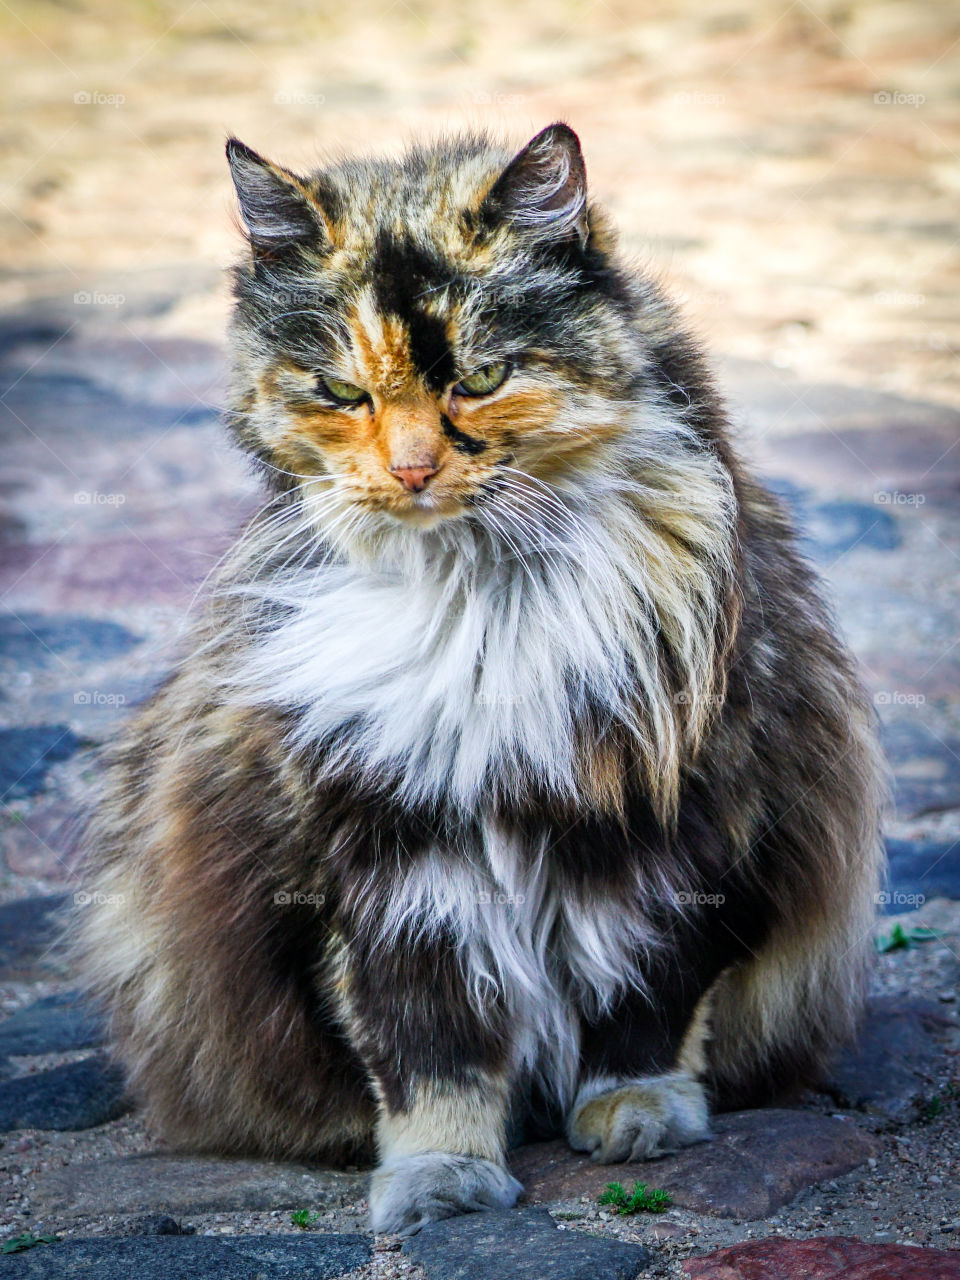 beautiful colorful homeless cat on the paved city street